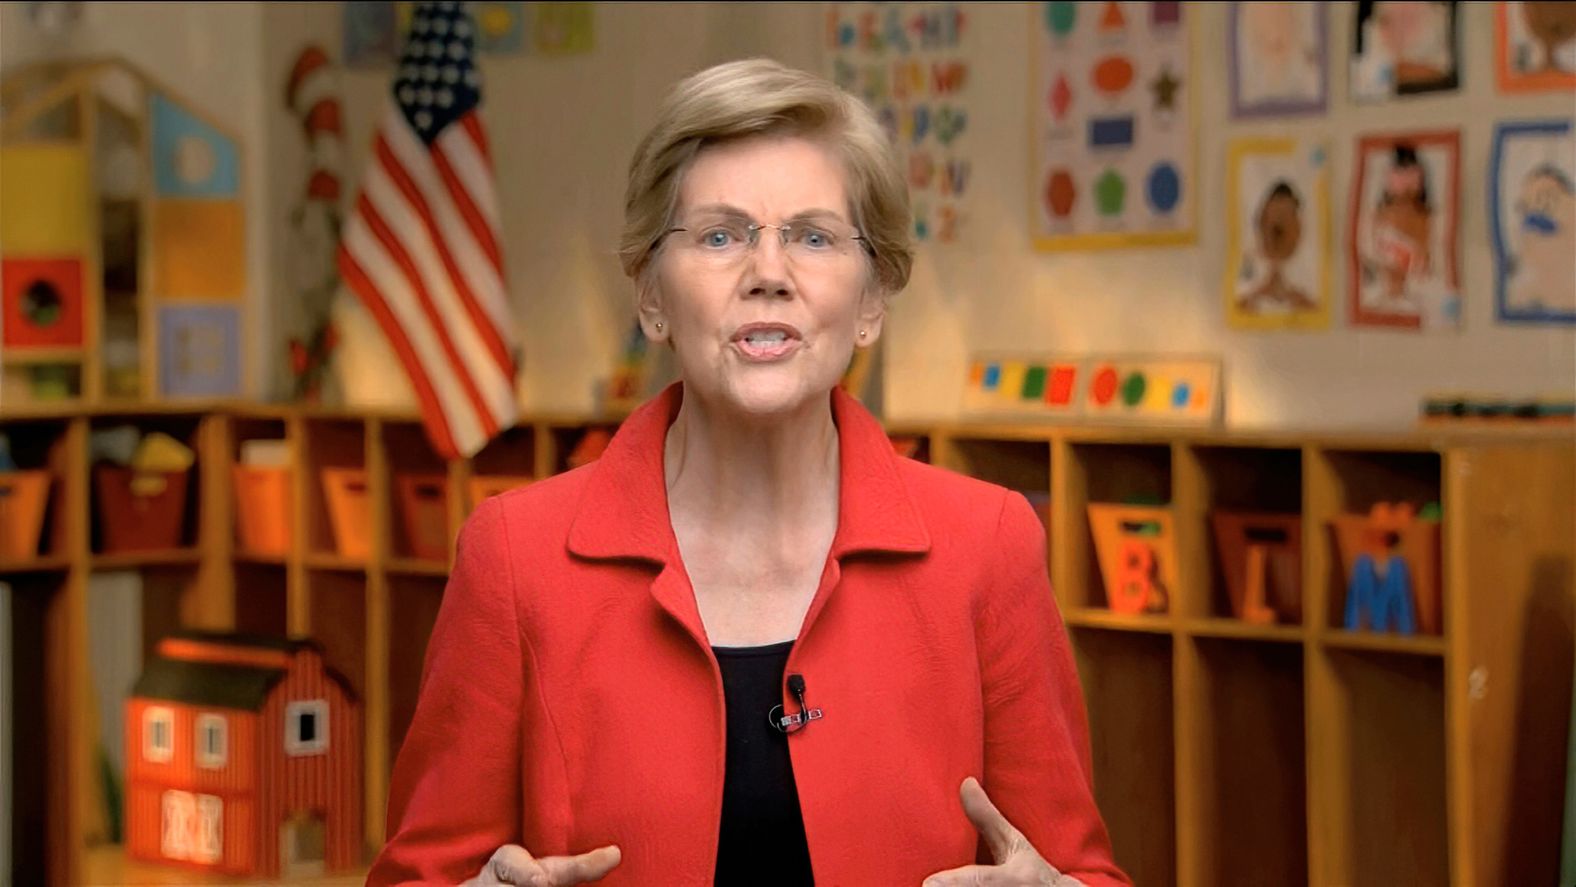 US Sen. Elizabeth Warren spoke from a pre-K and kindergarten facility that has been shuttered because of the coronavirus pandemic. <a href="index.php?page=&url=https%3A%2F%2Fwww.cnn.com%2Fpolitics%2Flive-news%2Fdnc-2020-day-3%2Fh_3236105cc23b6c09a74f619916344a83" target="_blank">She focused her remarks on child care,</a> an issue that has grown in prominence these last few months as parents struggle to balance work and caring for their children. At right, the letters "BLM" are seen — <a href="index.php?page=&url=https%3A%2F%2Fwww.cnn.com%2F2020%2F08%2F19%2Fpolitics%2Felizabeth-warren-blm-blocks-black-lives-matter-dnc%2Findex.html" target="_blank">a subtle tribute to the Black Lives Matter movement.</a>